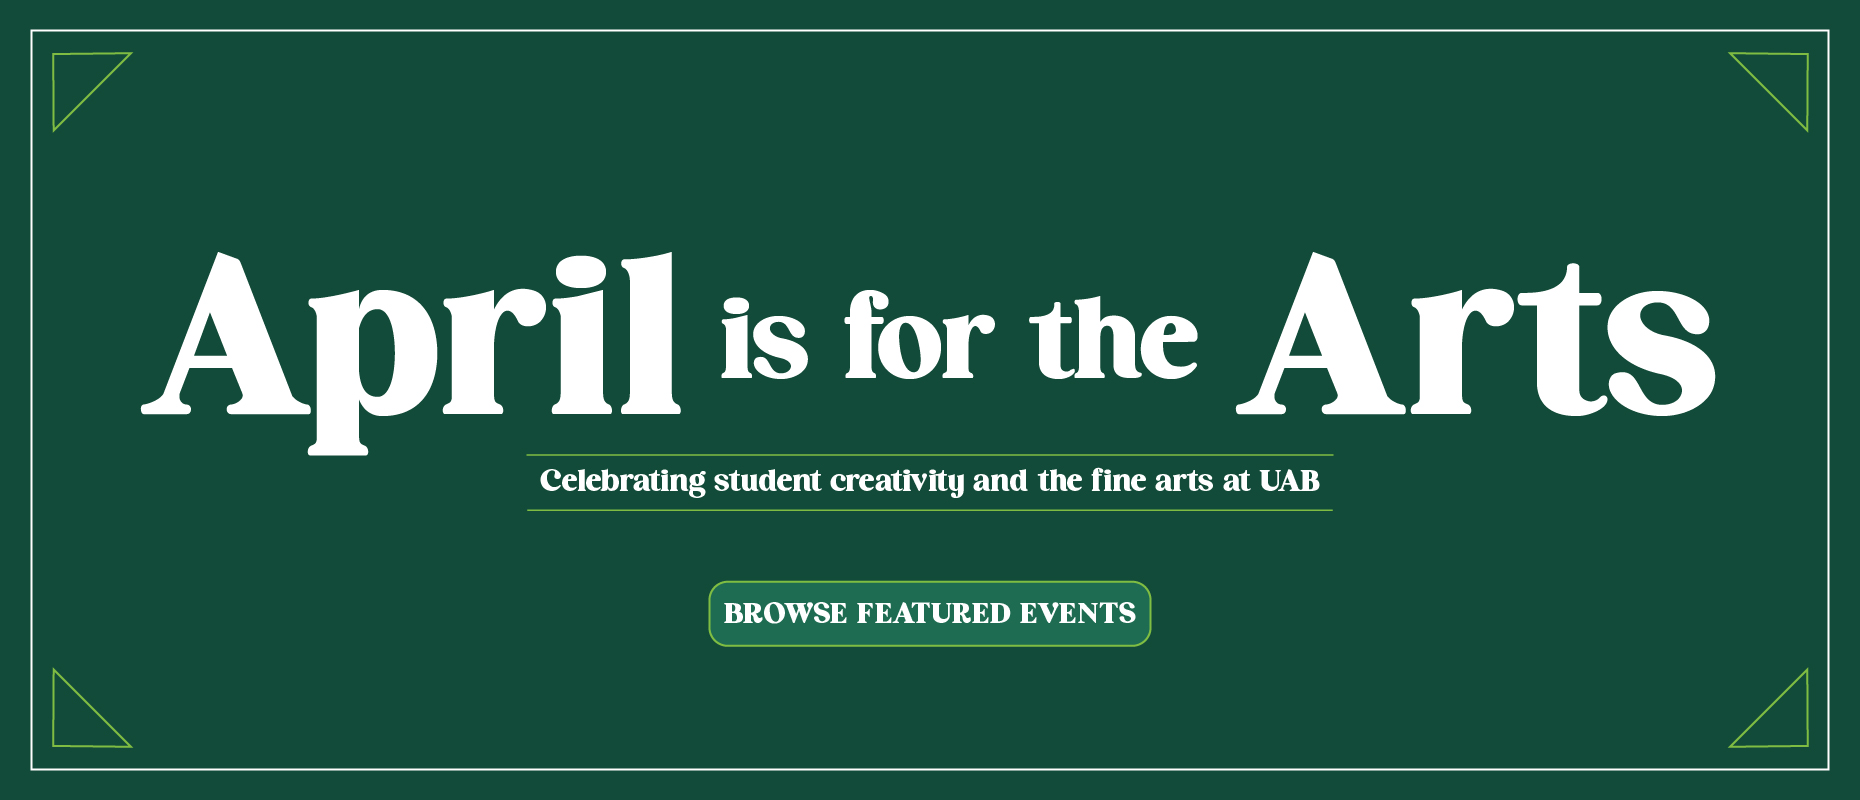 April is for the Arts: Celebrating student creativity and the fine arts at UAB. Browse featured events.